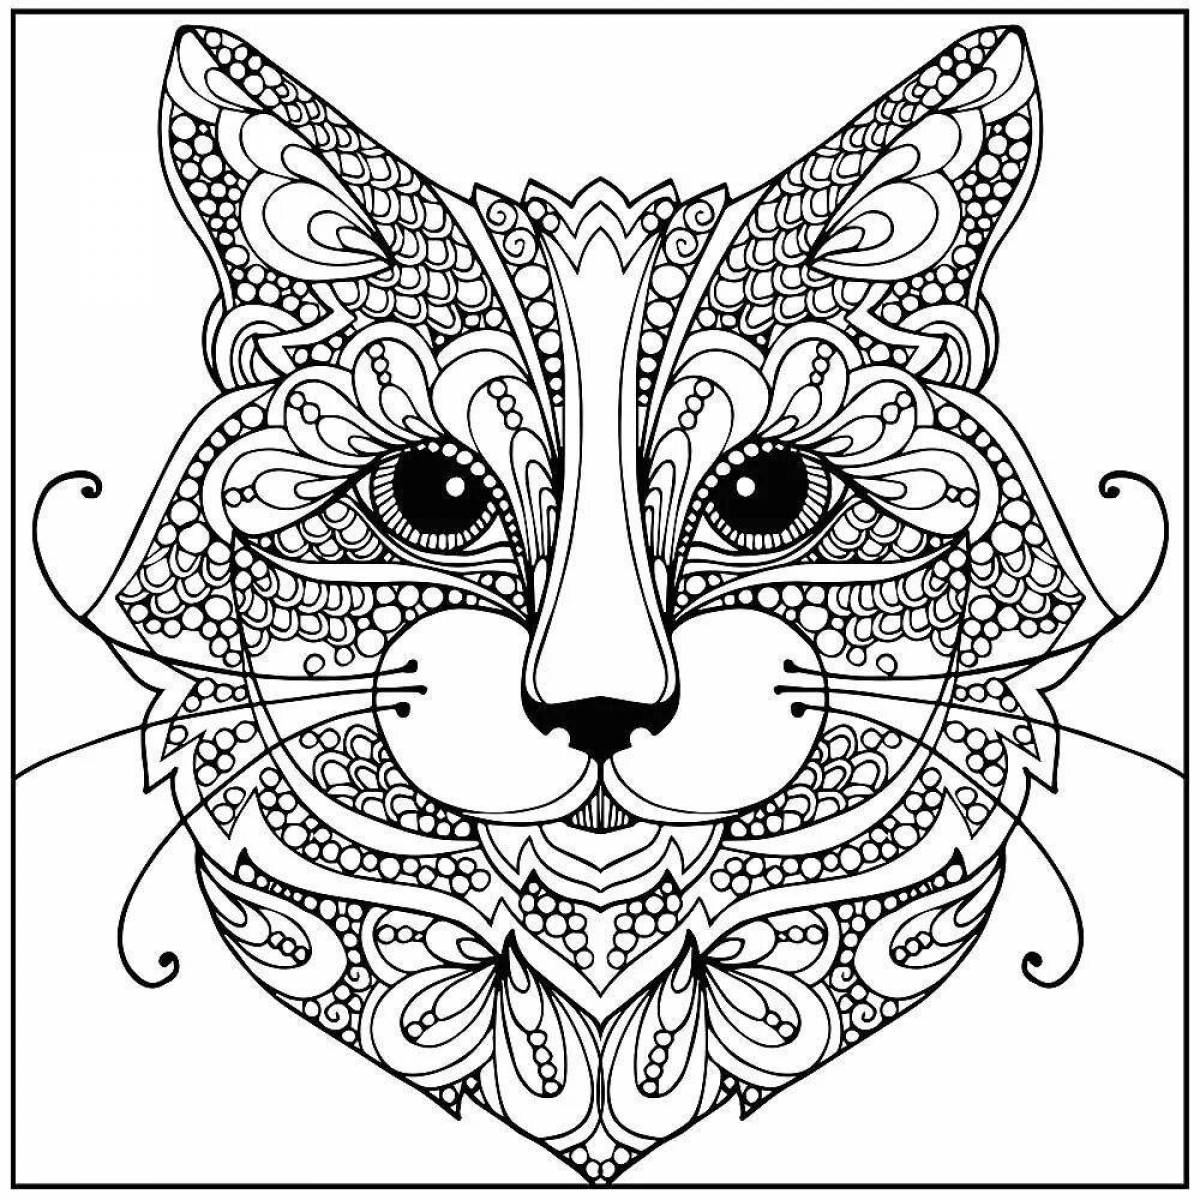 Funny 15 year anti-stress coloring book